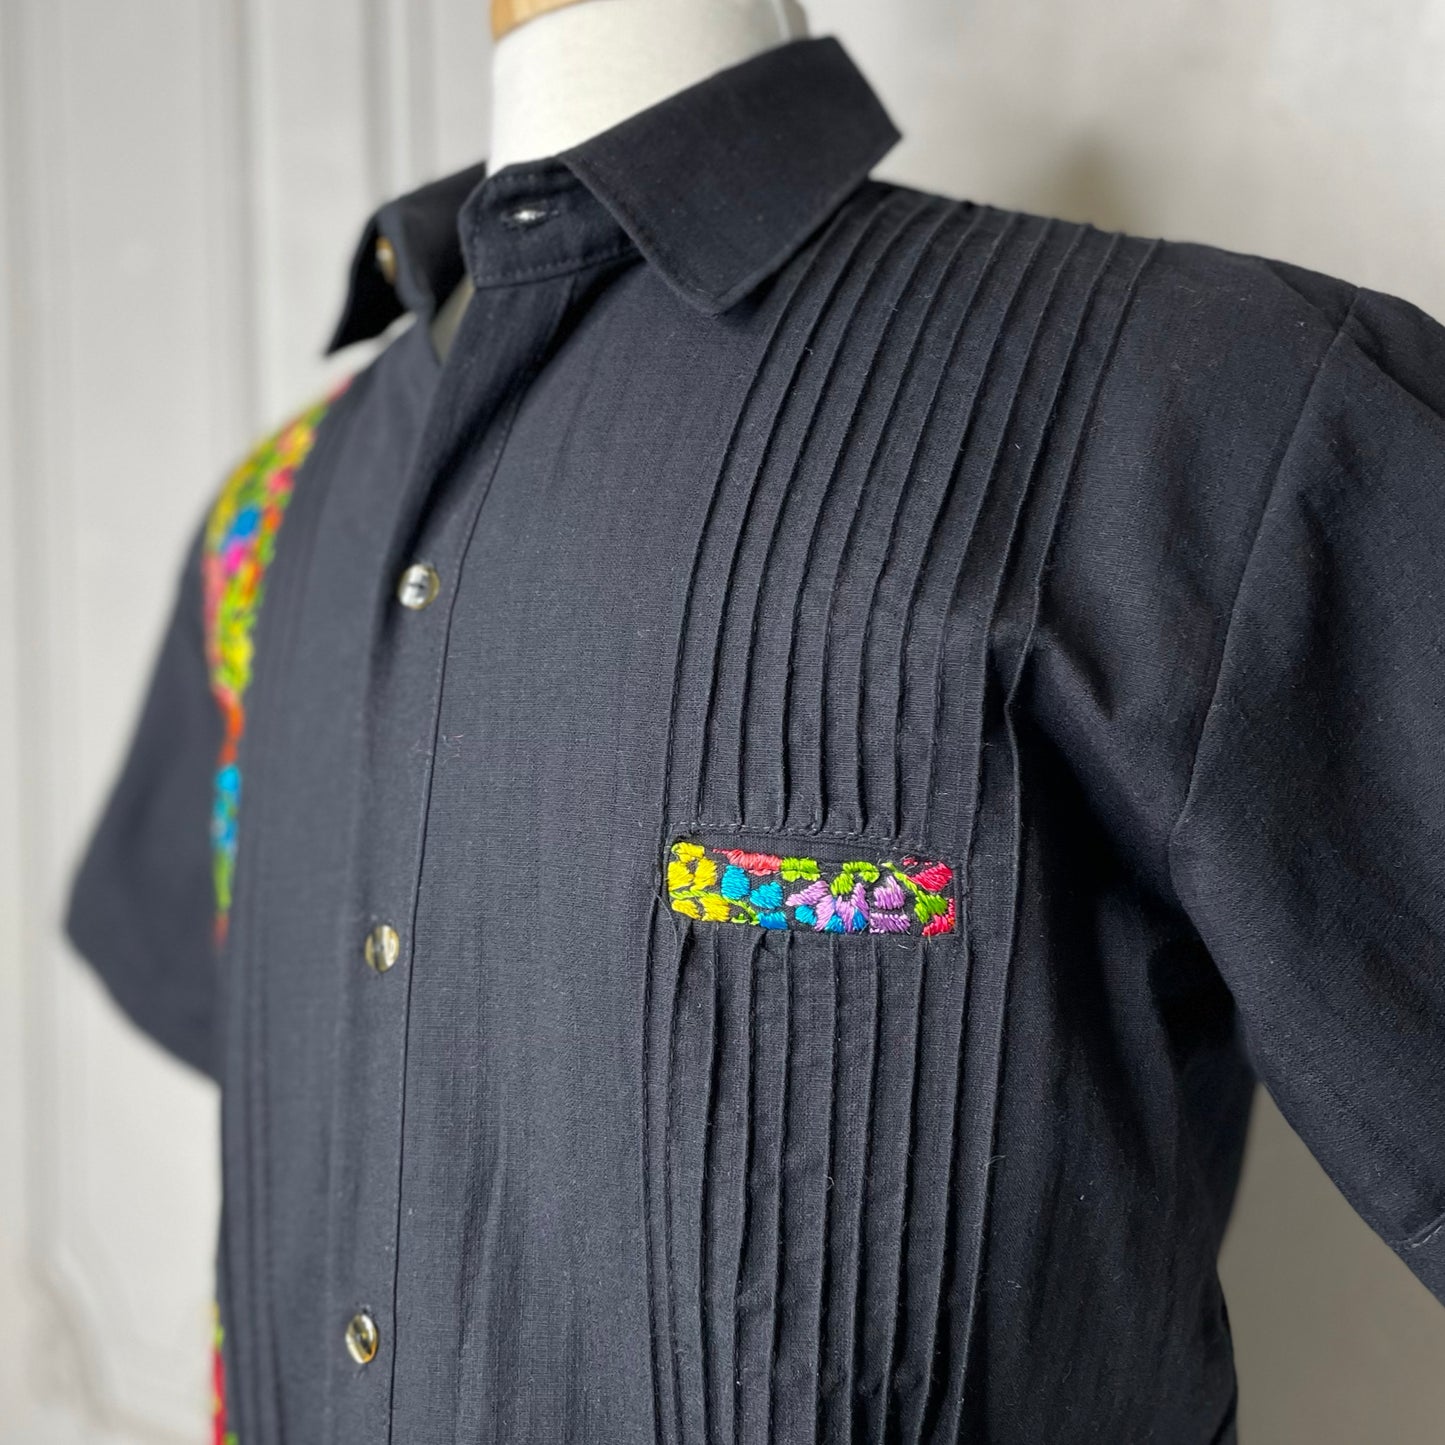 Men's Linen Shirts for sale in Perea, New Mexico, Facebook Marketplace